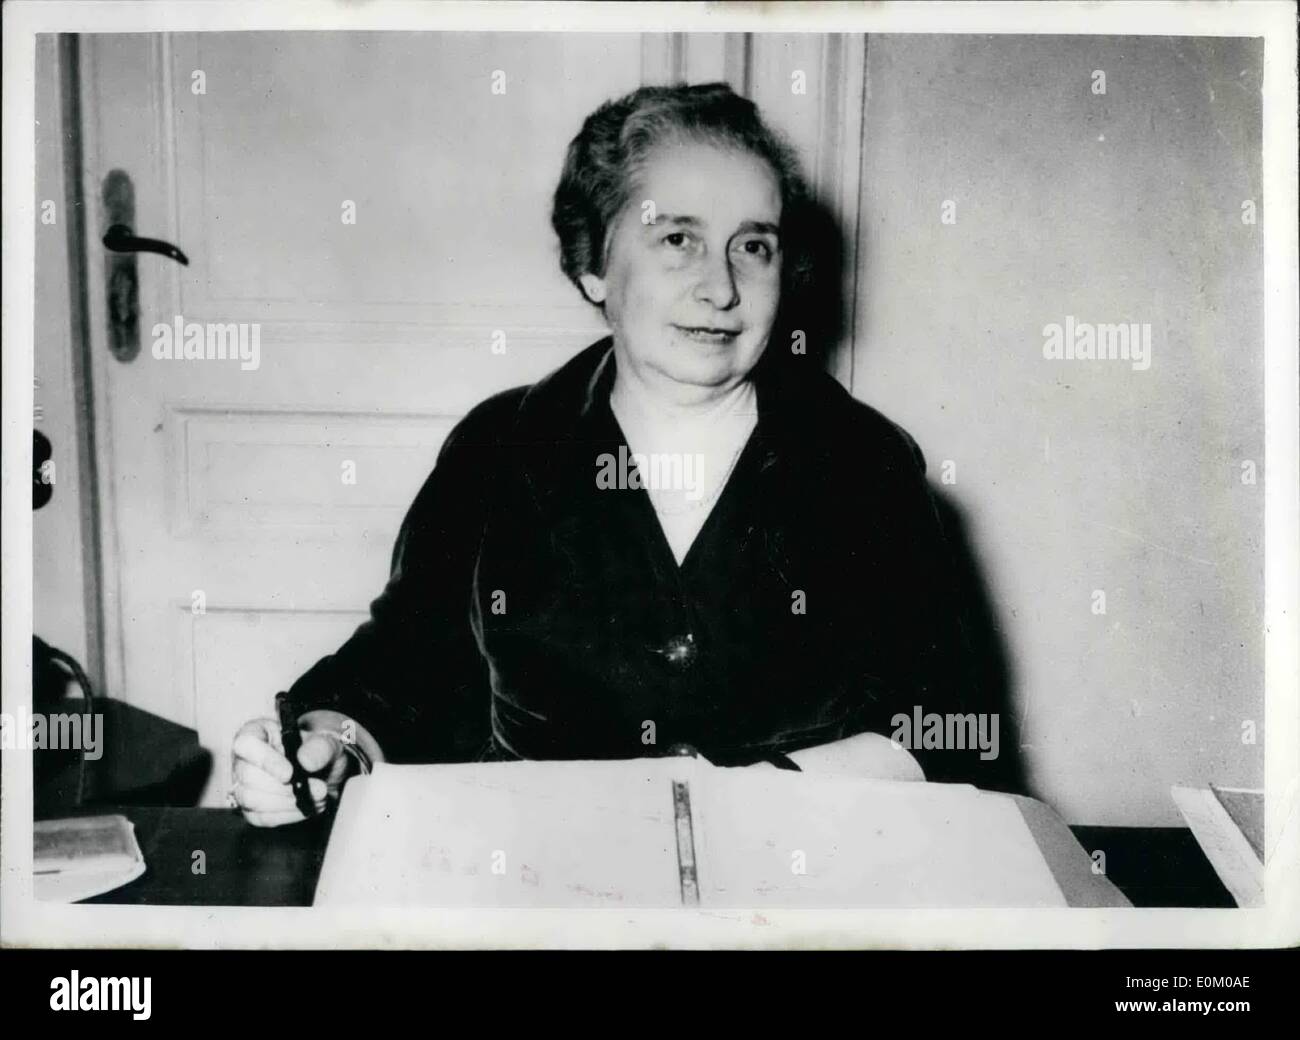 Jan. 01, 1953 - The first woman deputy in Greece. Mrs. Eleni Skouras successful in Salonika elections.: Mrs. Eleni Skouras, a lawyer, who was successful on Sunday in the Salonika by election is the first Greek woman to become a member of Parliament. She belongs to the Greek Rally, the Government Party, and had a small majority over the next Candidate, the chairman of the extreme left-wing party, E.D.A. The Greek Rally, Government Party is under the control of Marshall Papagos. Photo shows Mrs. Eleni Skouras the first Greek Woman Deputy after he election. Stock Photo